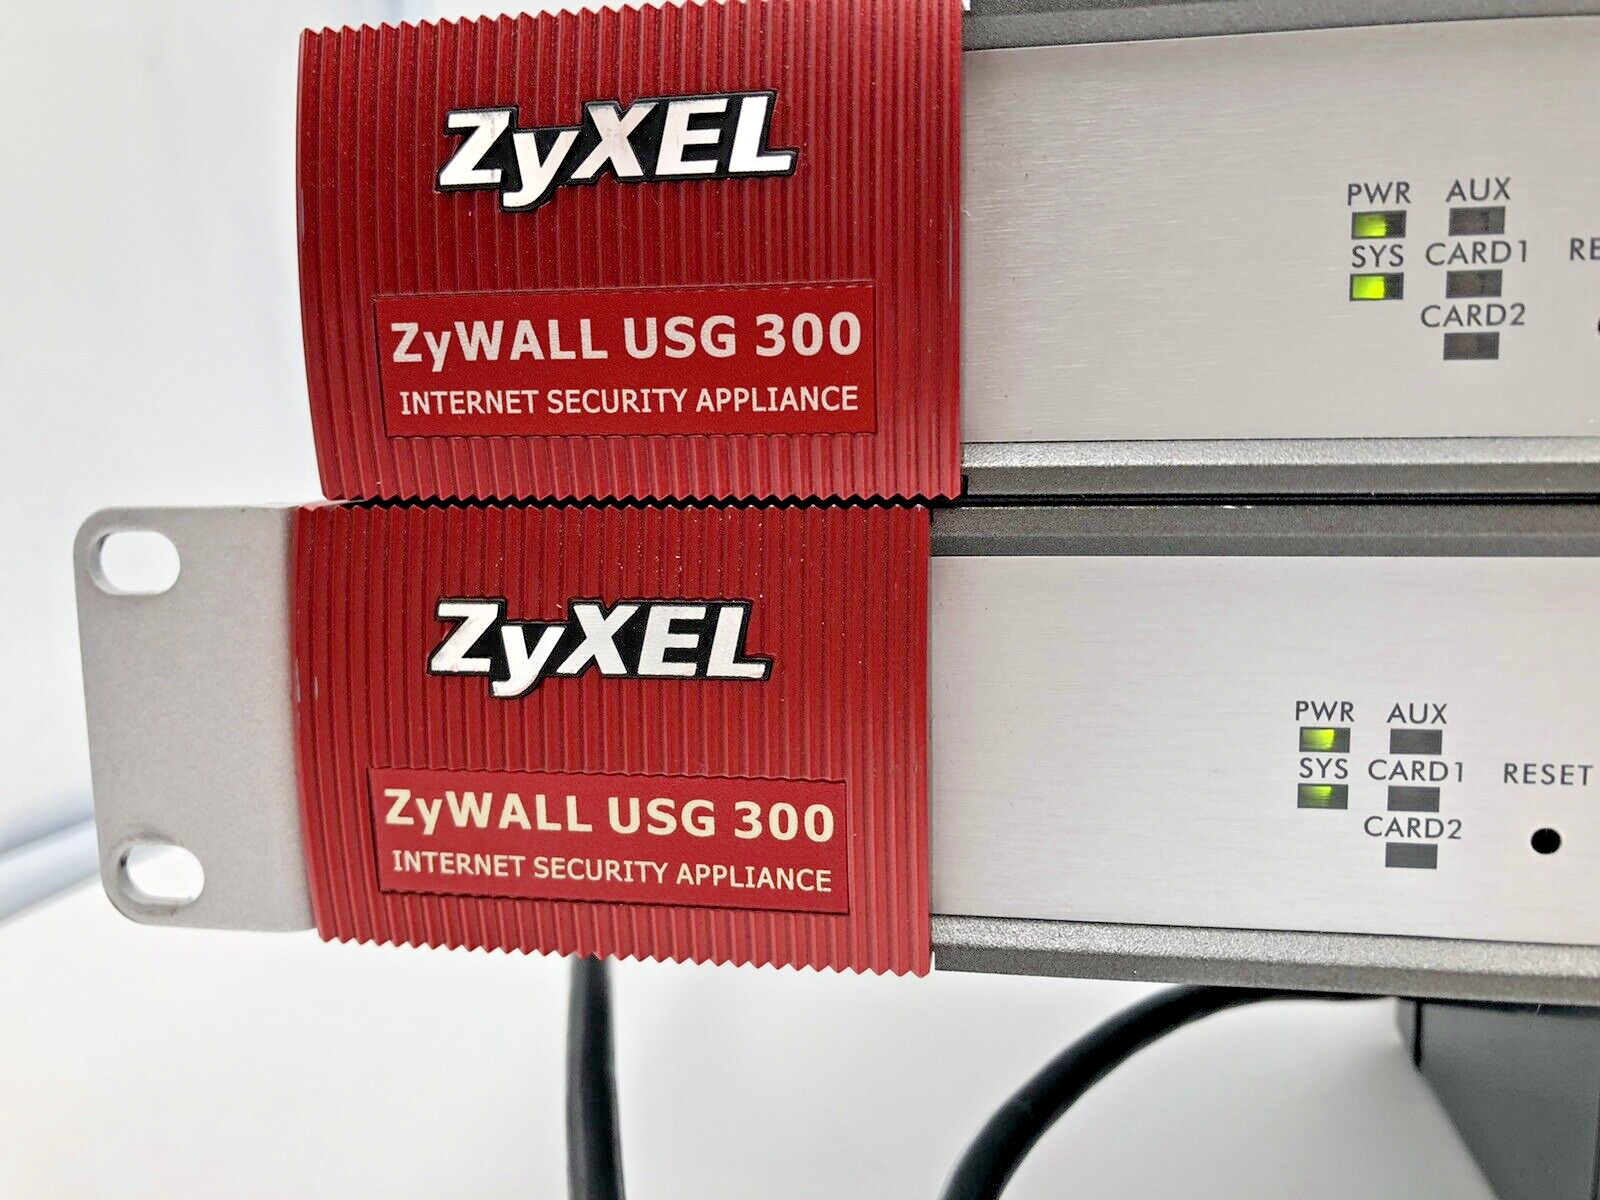 Lot of 2 Zyxel USG 300 Unified Security Gateway